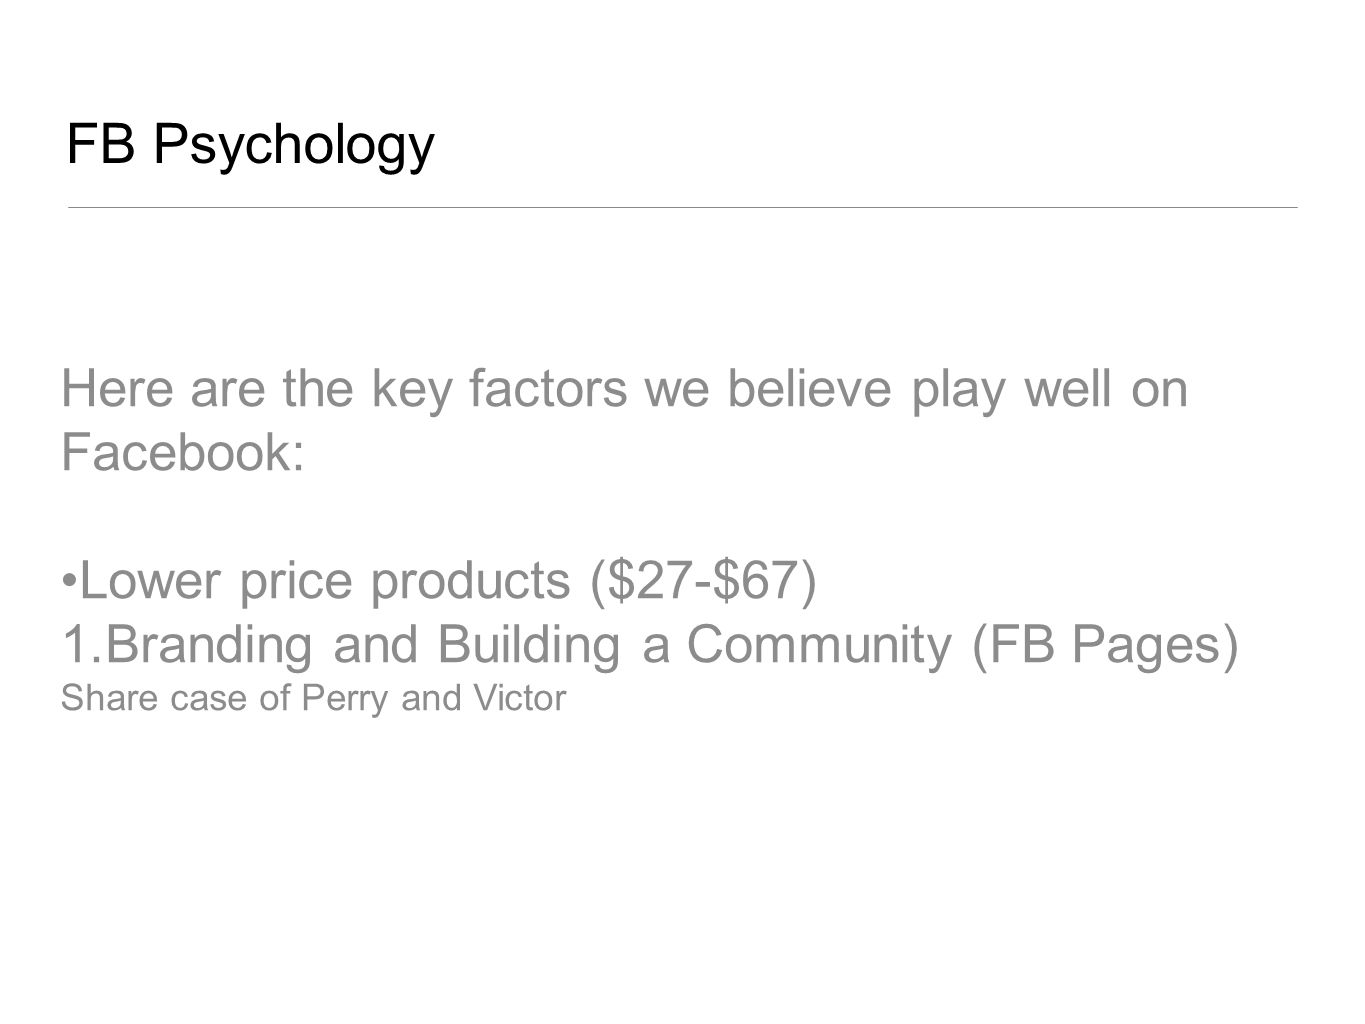 FB Psychology Here are the key factors we believe play well on Facebook: Lower price products ($27-$67) 1.Branding and Building a Community (FB Pages) Share case of Perry and Victor